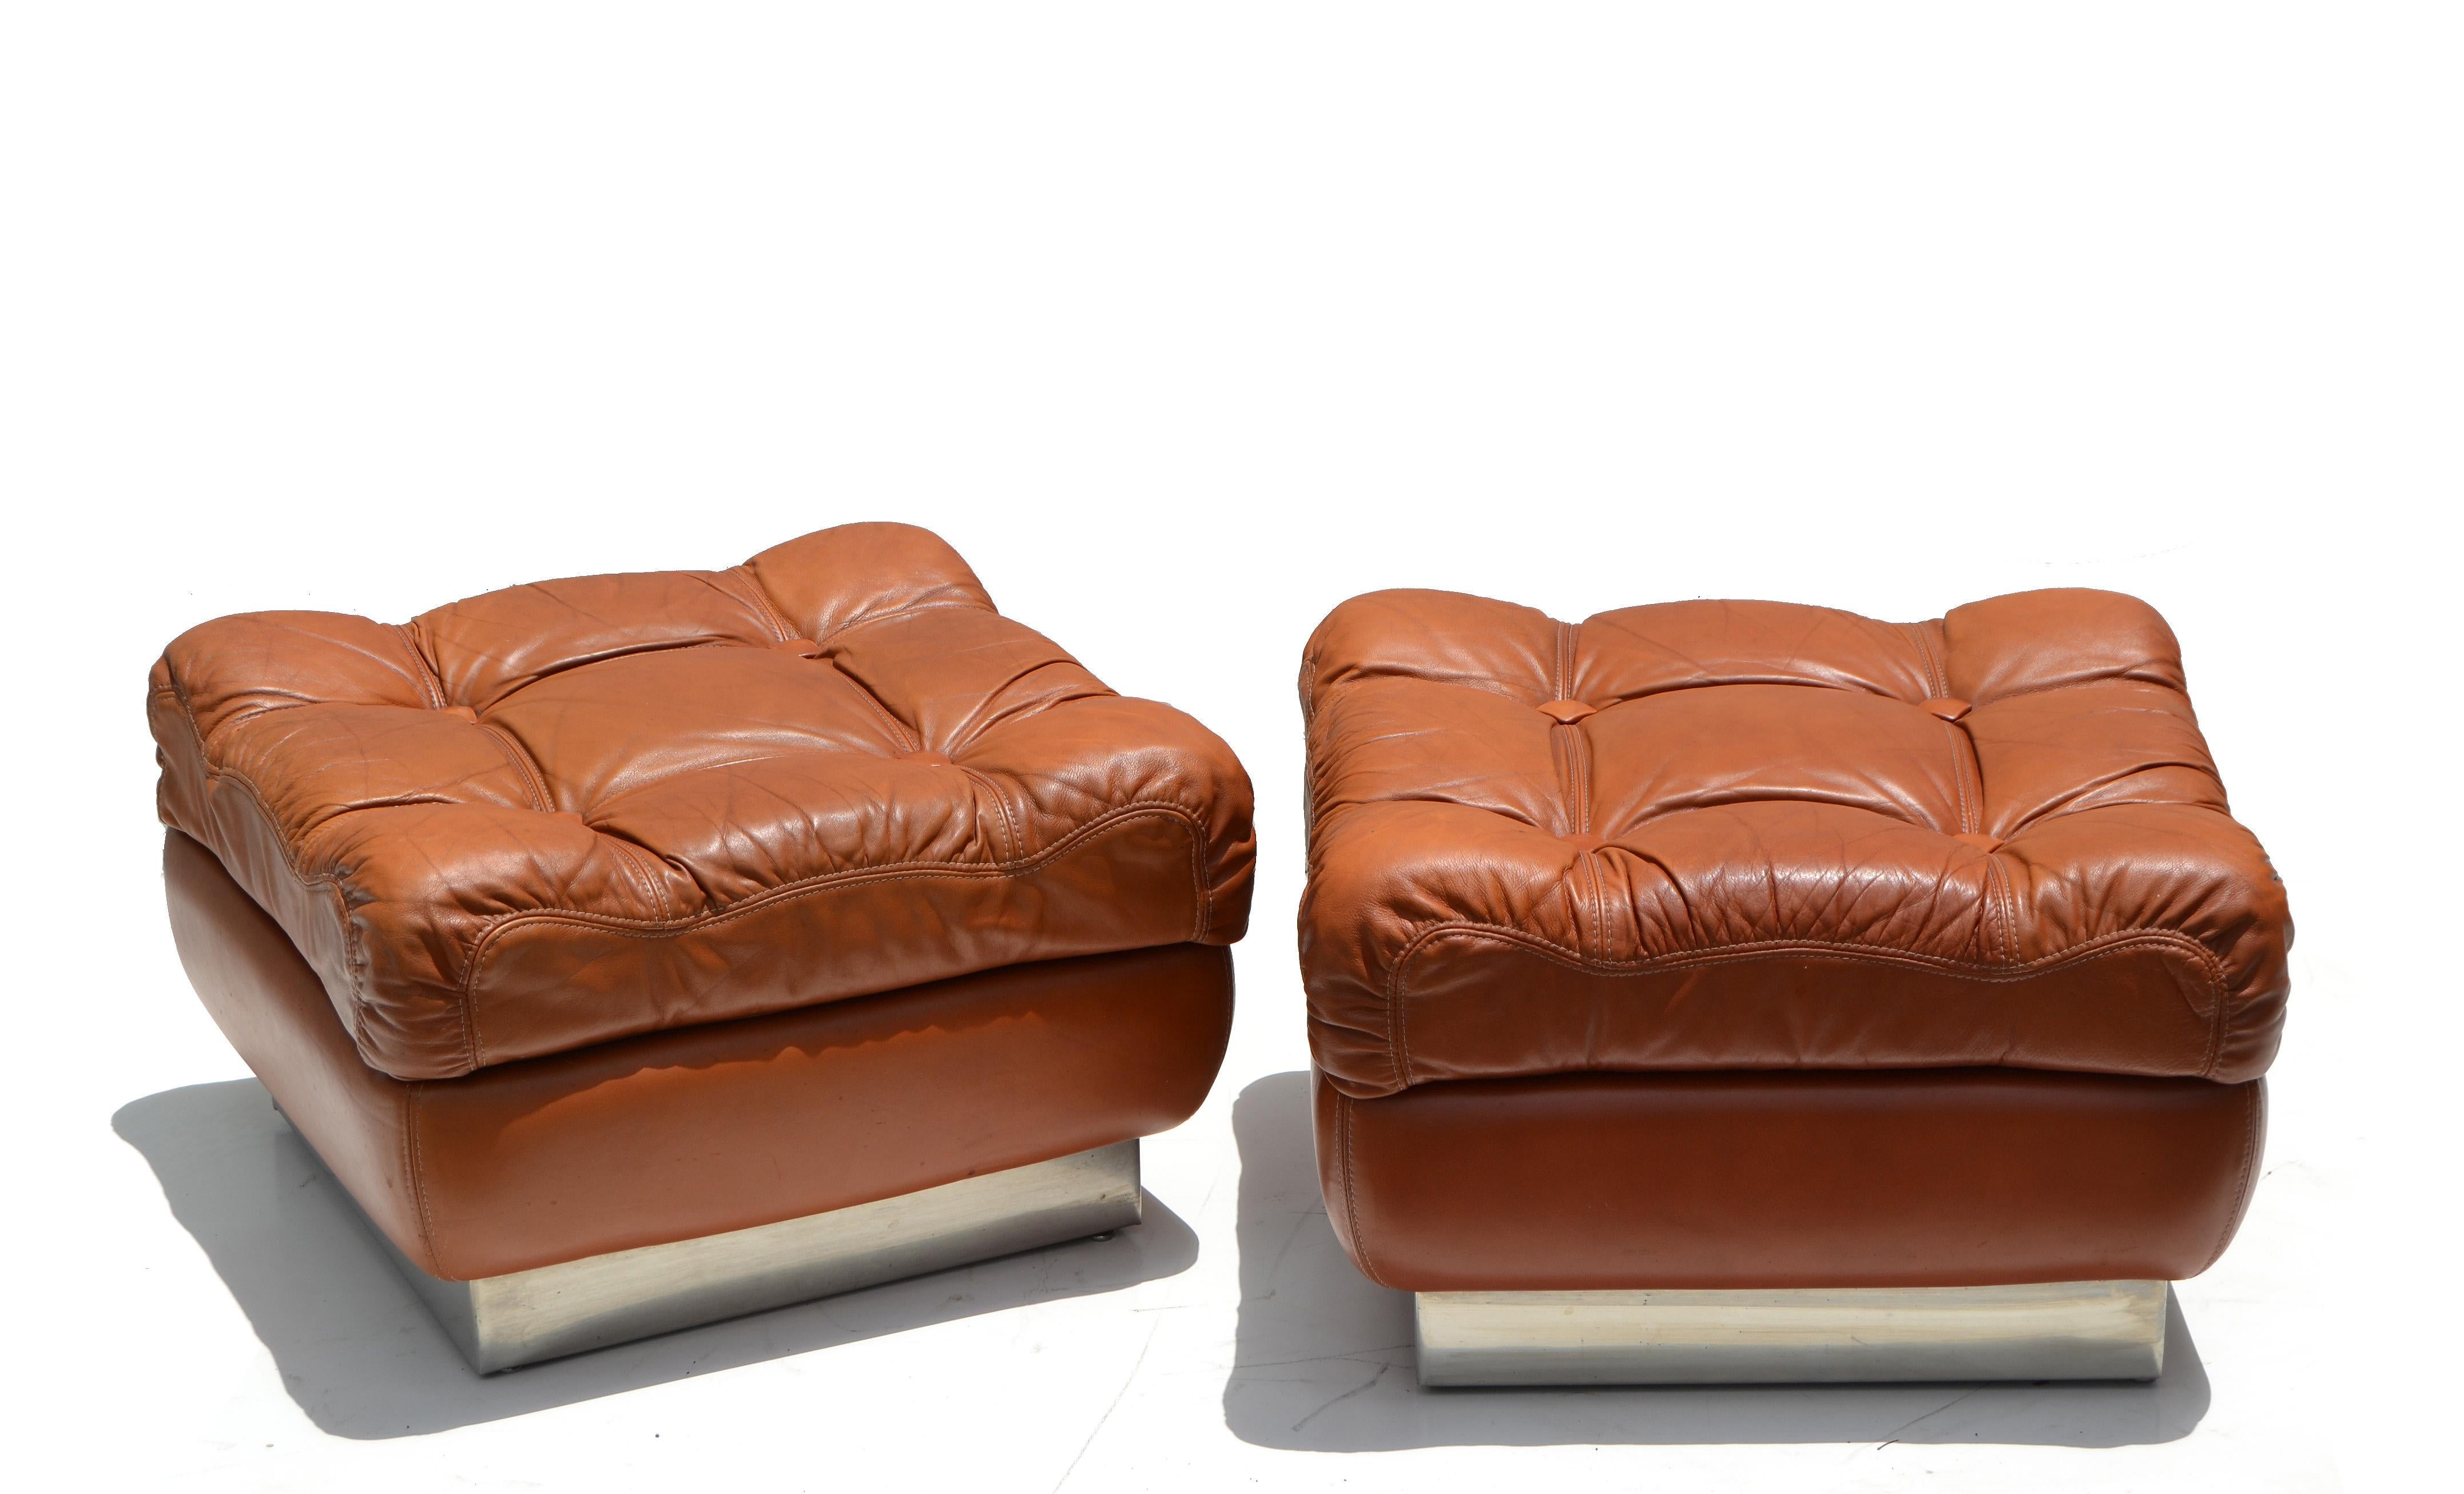 French Jacques Charpentier Mid-Century Modern Tufted Leather Ottoman Stool Pair For Sale